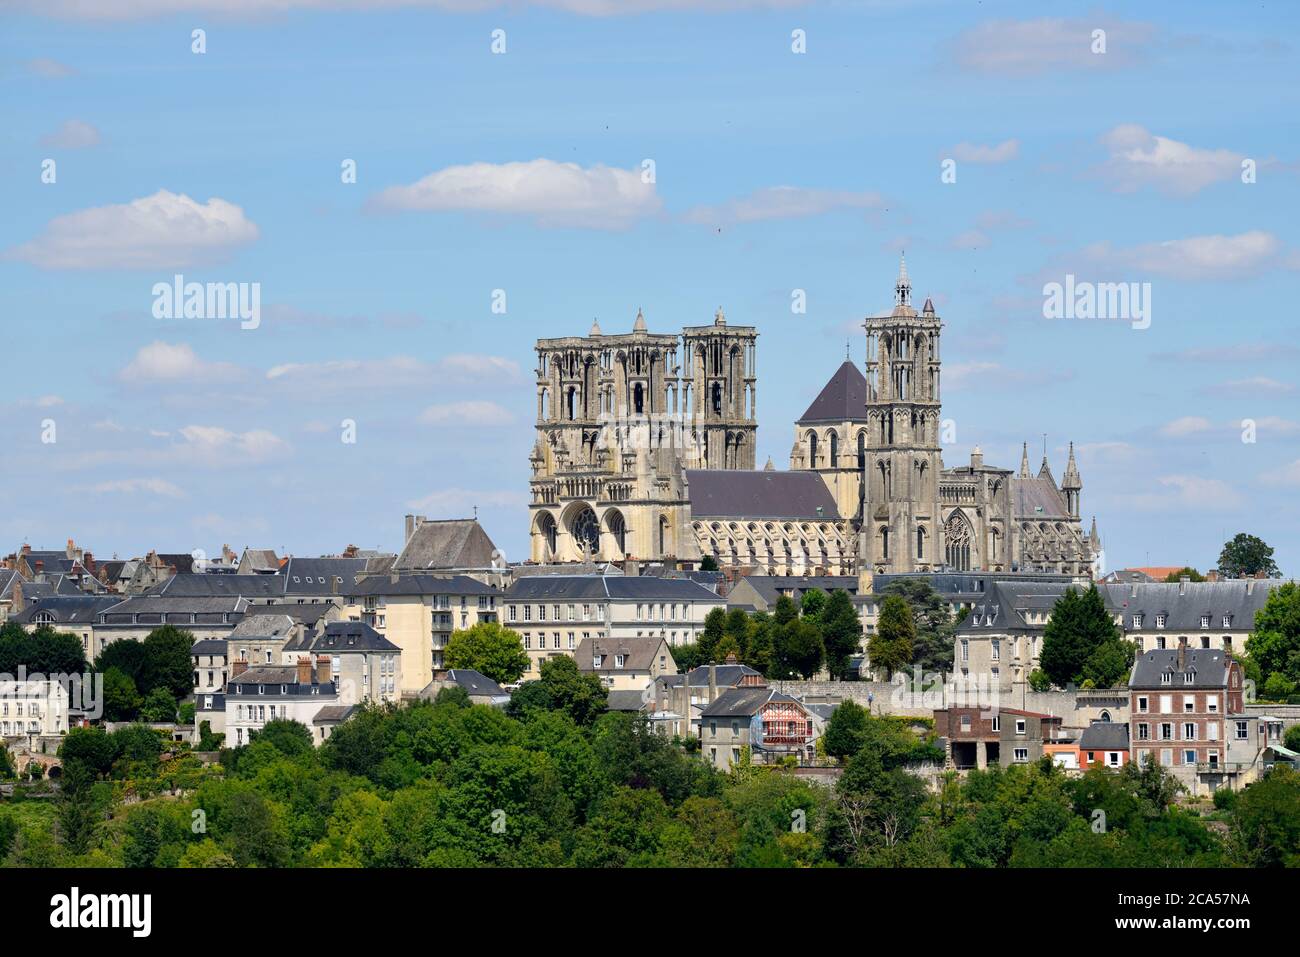 France, Aisne, Laon, cathedral Notre Dame built between 1150 and 1180 over the city Stock Photo